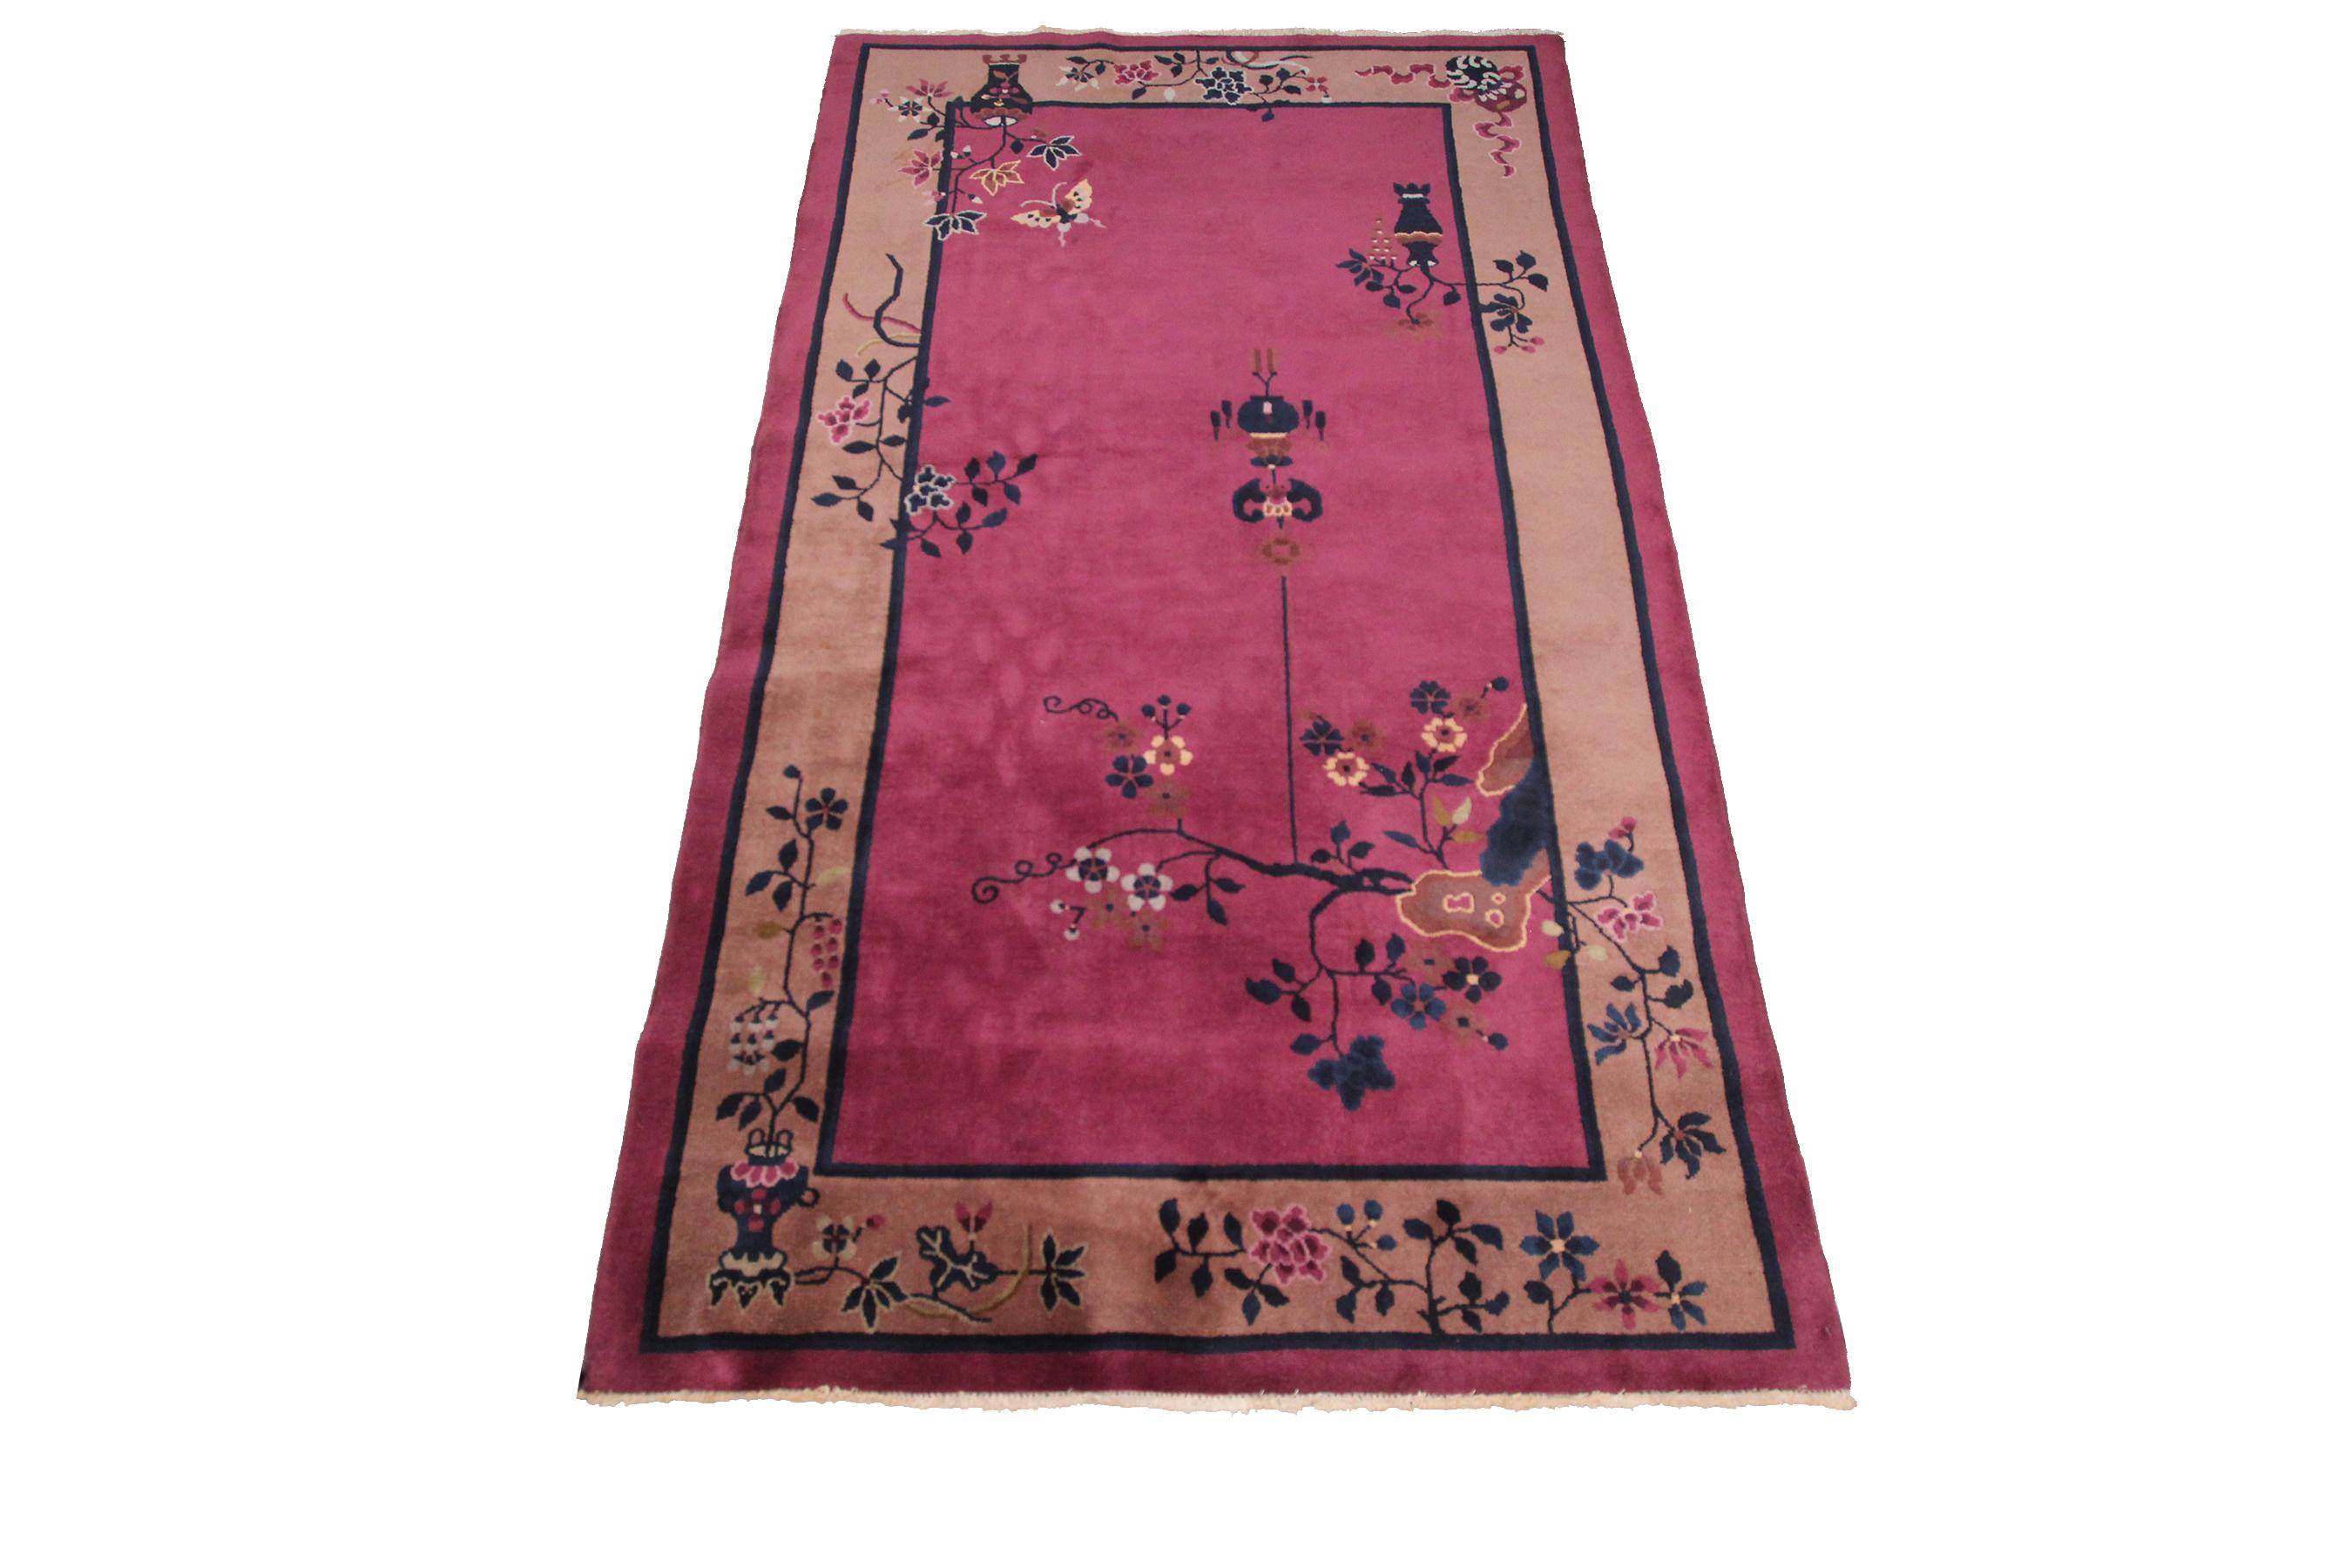 Early 20th Century Antique Art Deco Rug Antique Tree of Life Rug Chinese Rug 1920 Purple Vase For Sale